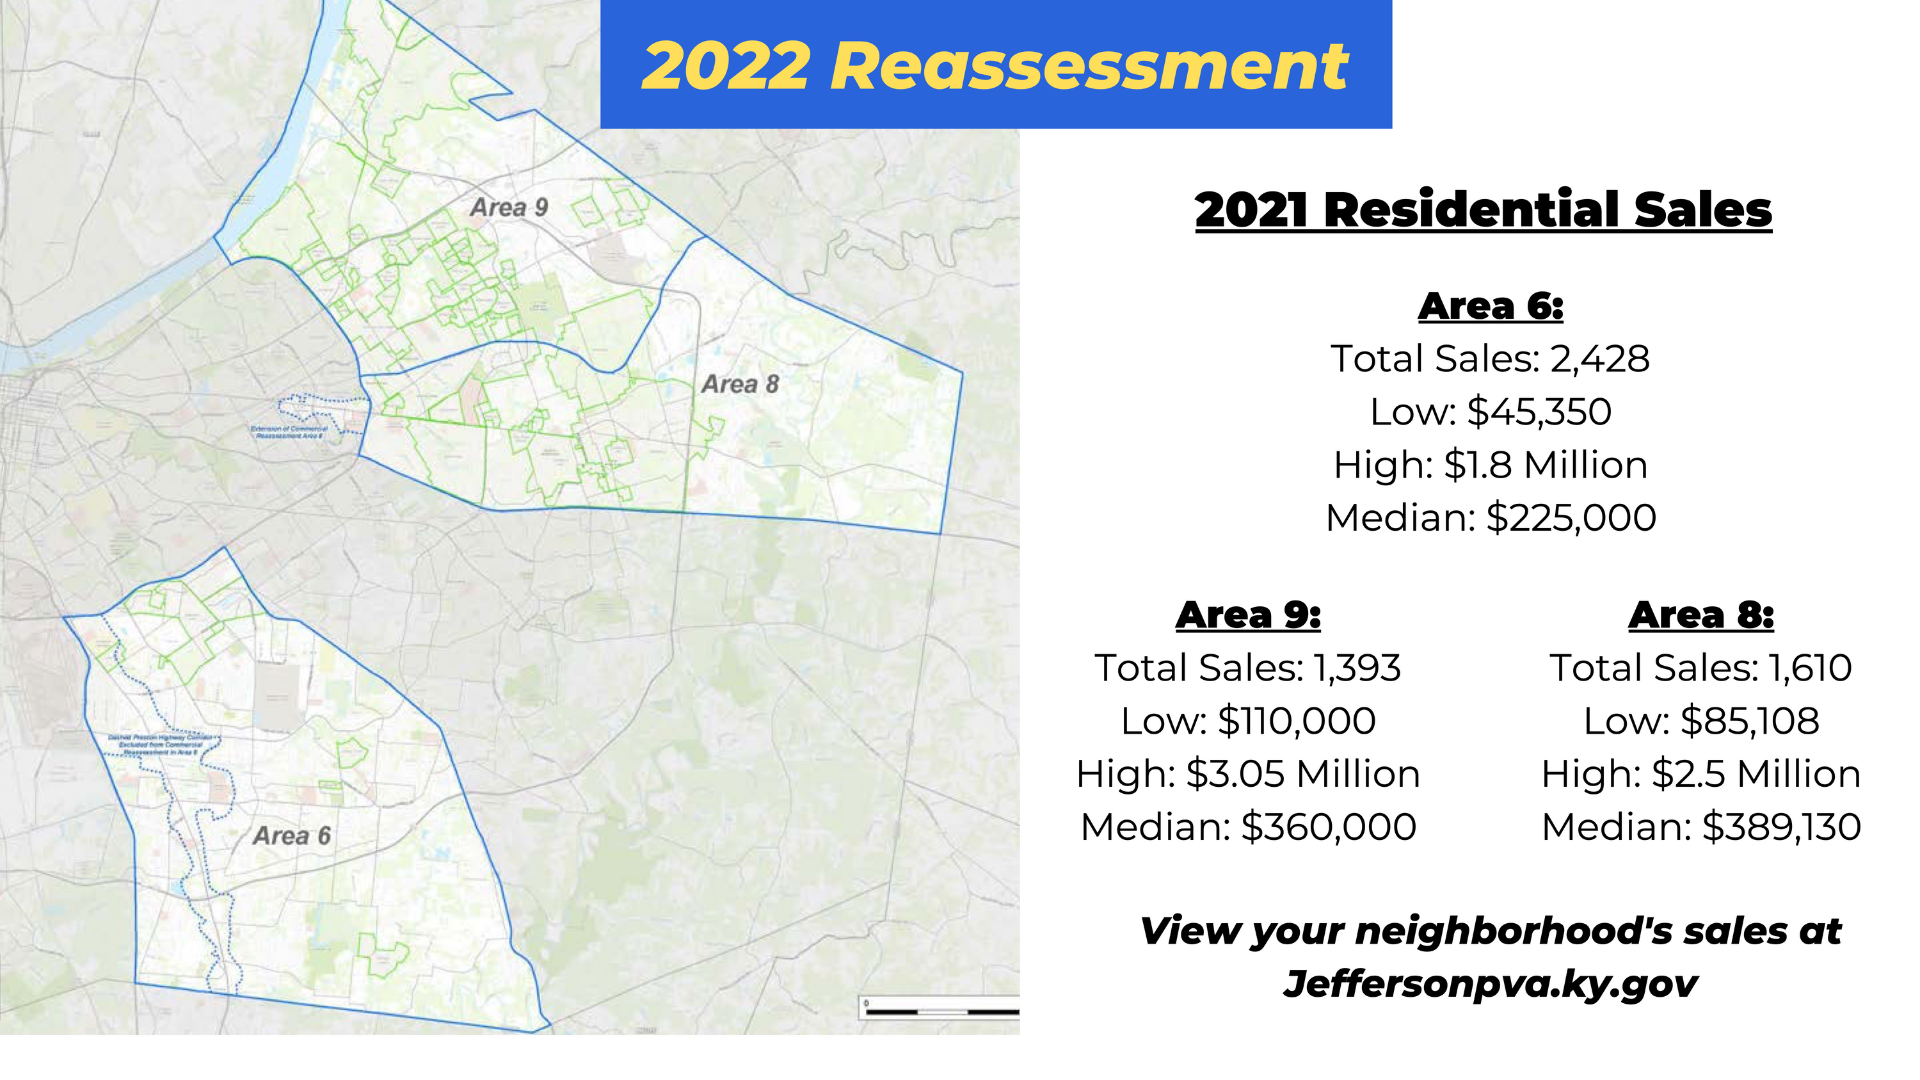 2022 reassessment areas map